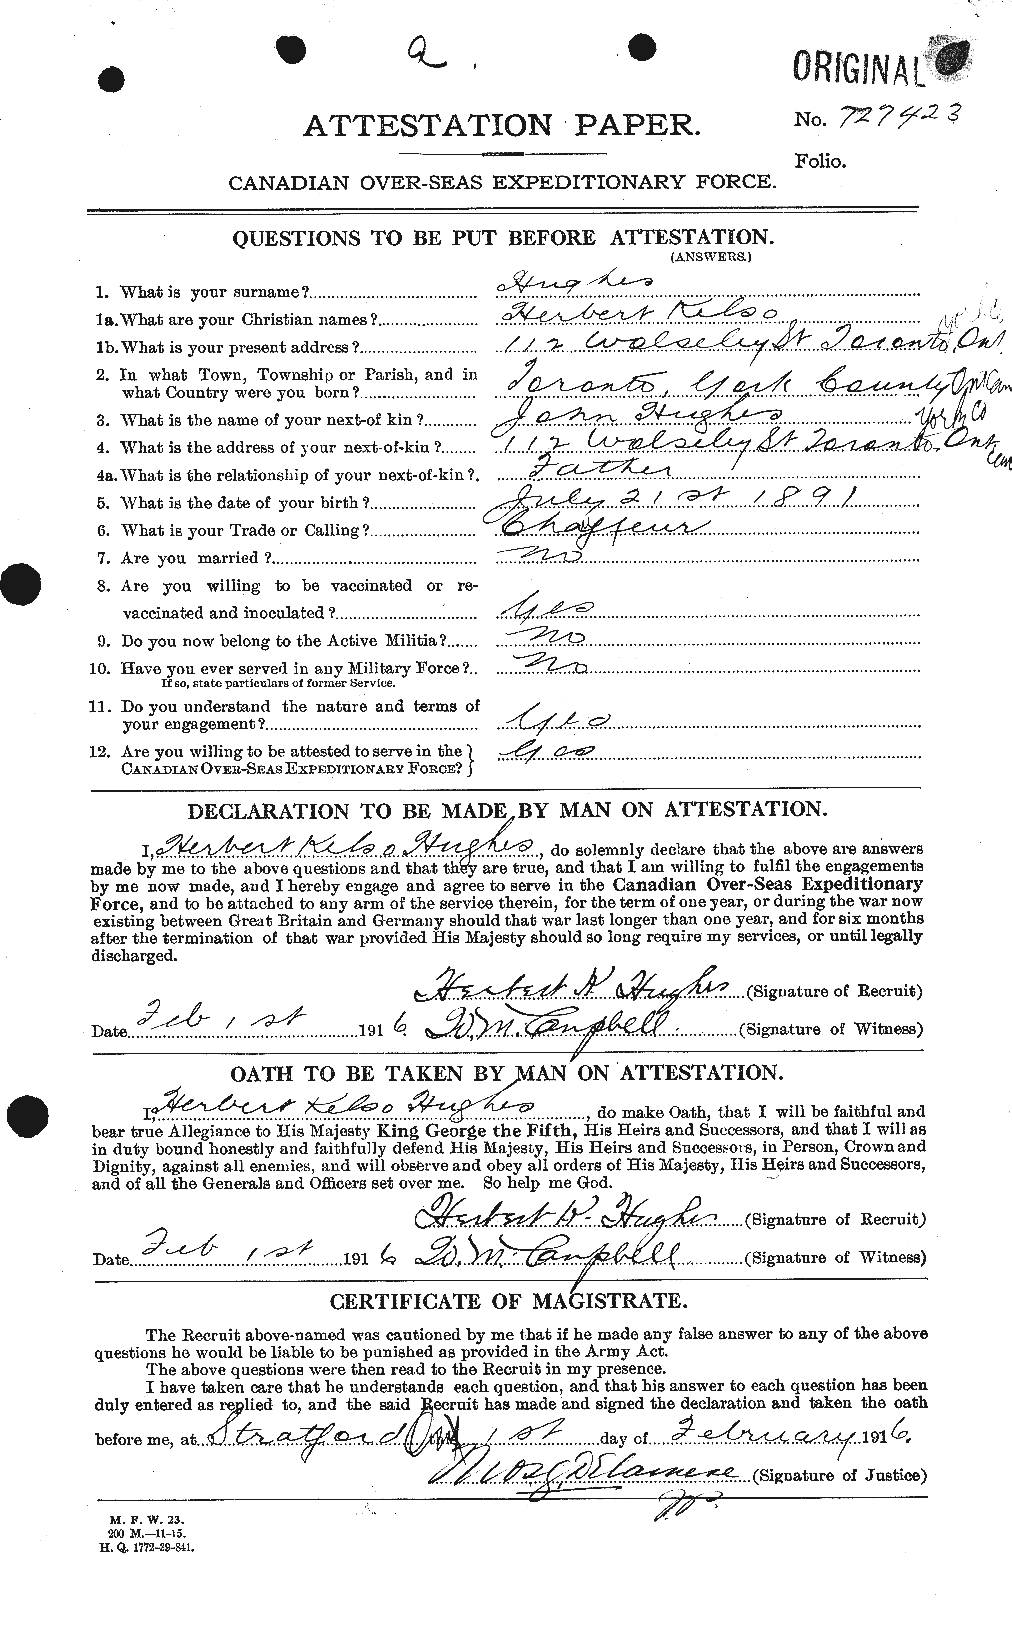 Personnel Records of the First World War - CEF 403901a